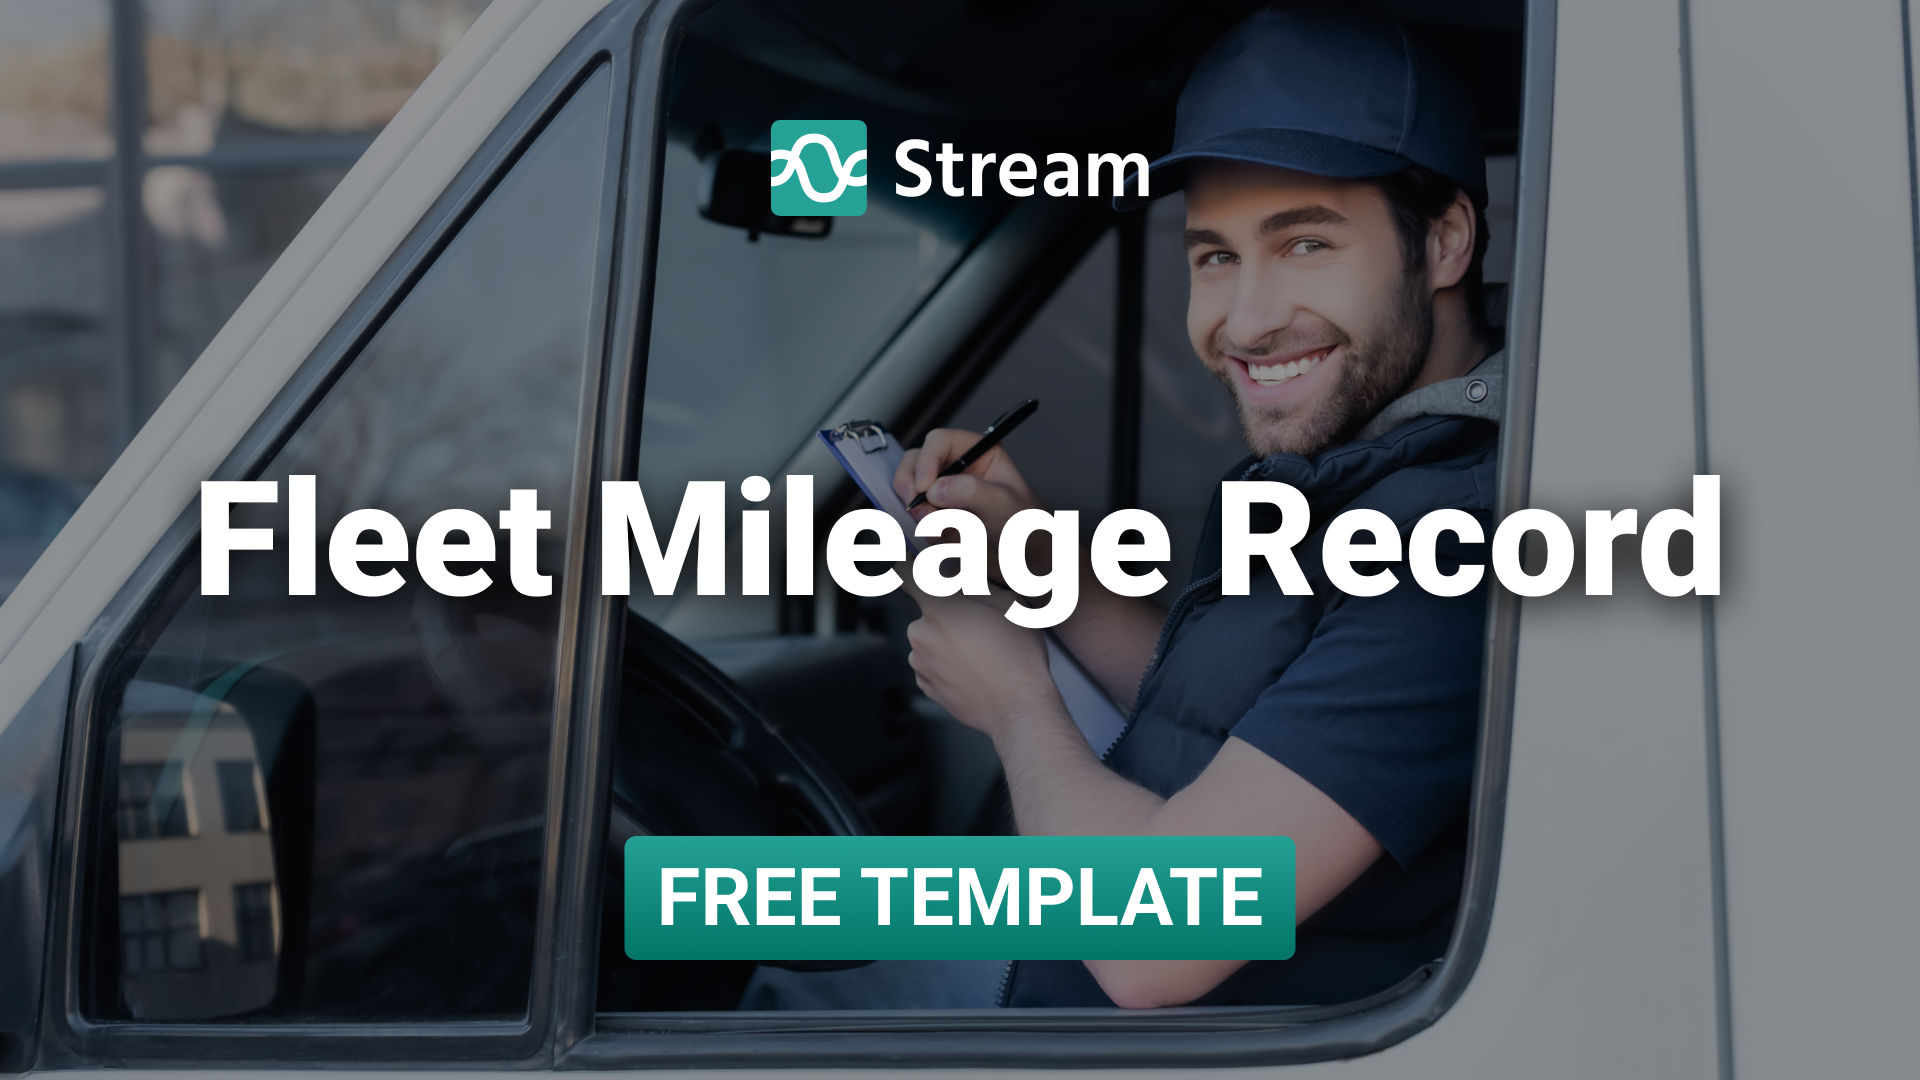 Fleet-Mileage-Record-Template-FREE-Download-Featured-Image